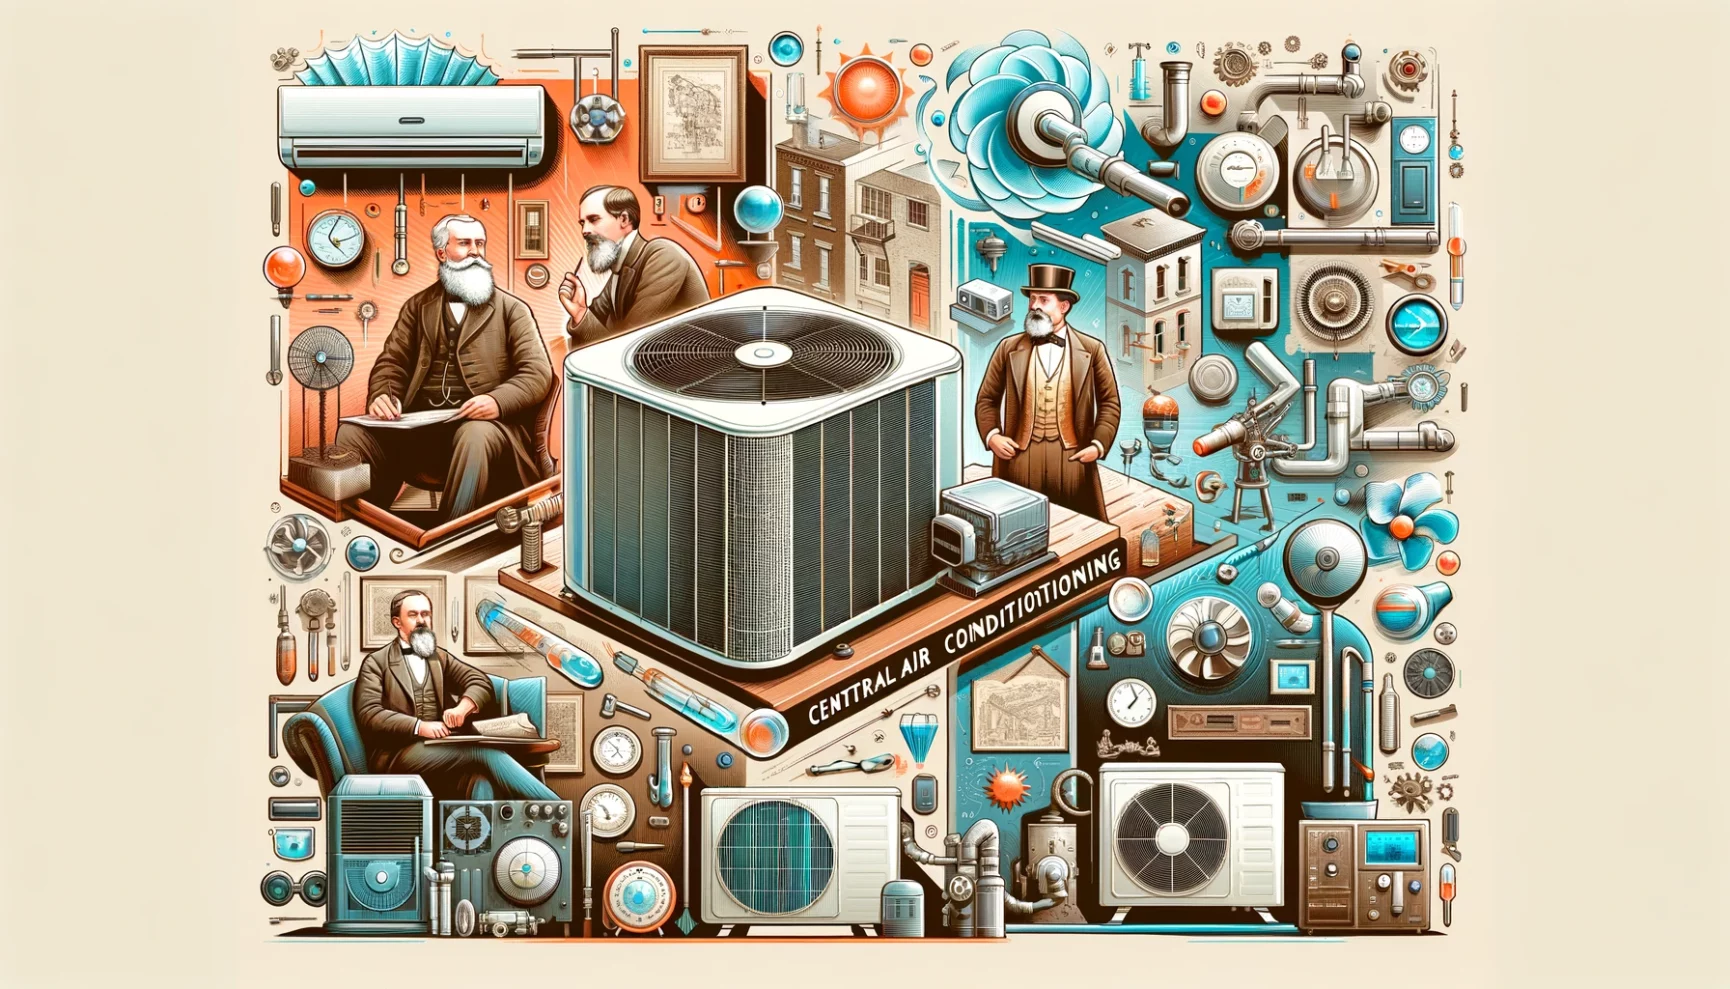 An illustrated collage showcasing the evolution and various components of central air conditioning systems.